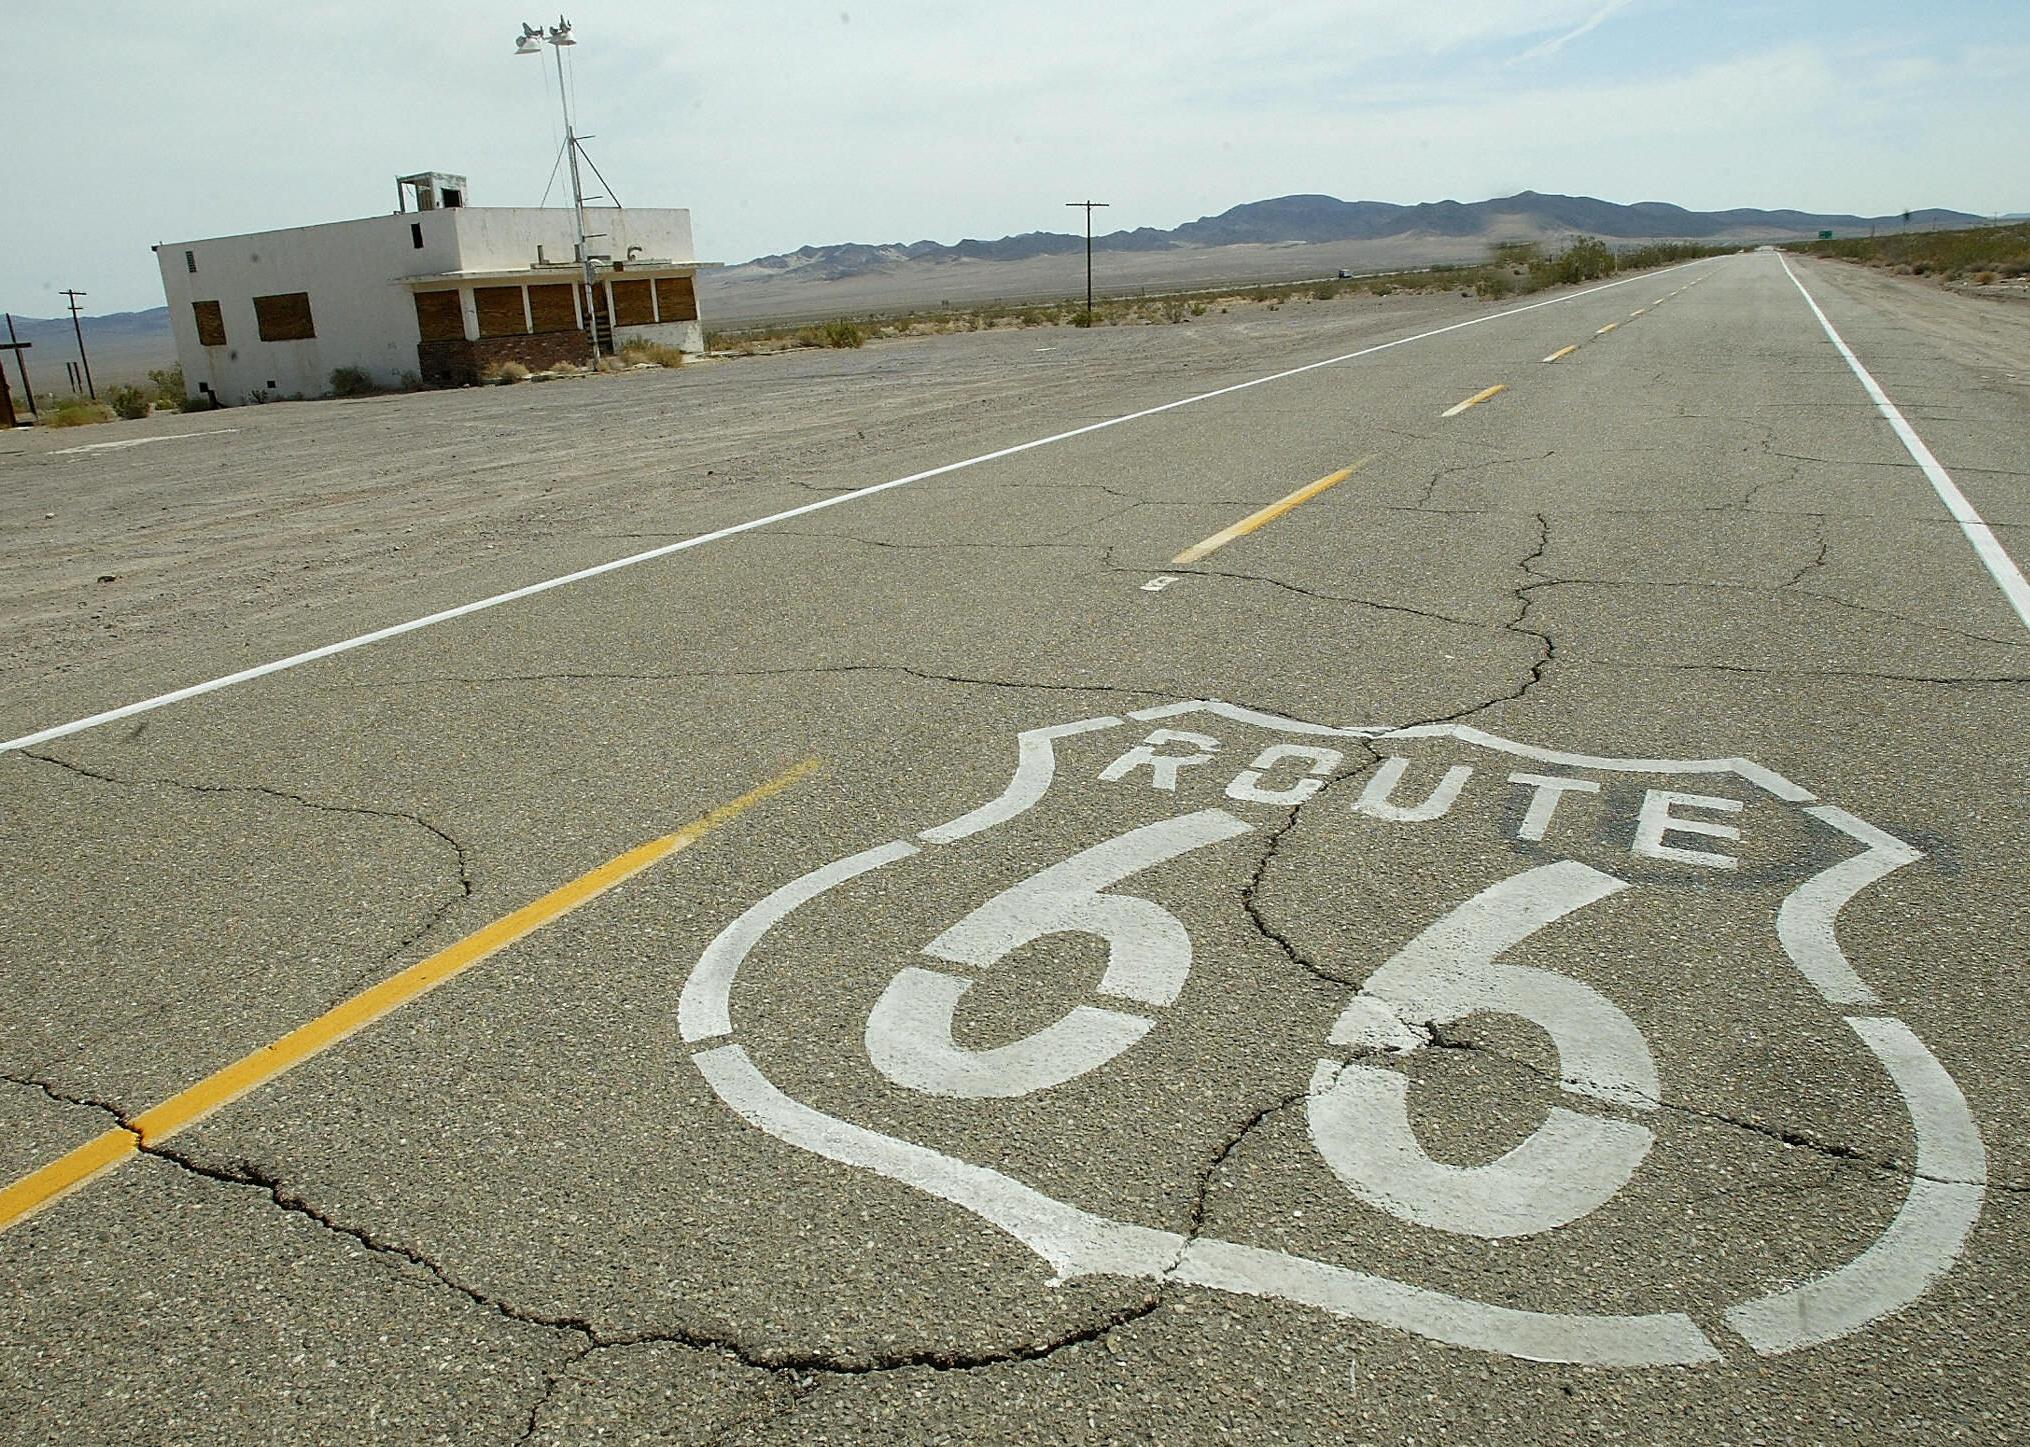 Route 66 painted on the old road through an abandoned town in California's Mojave desert.